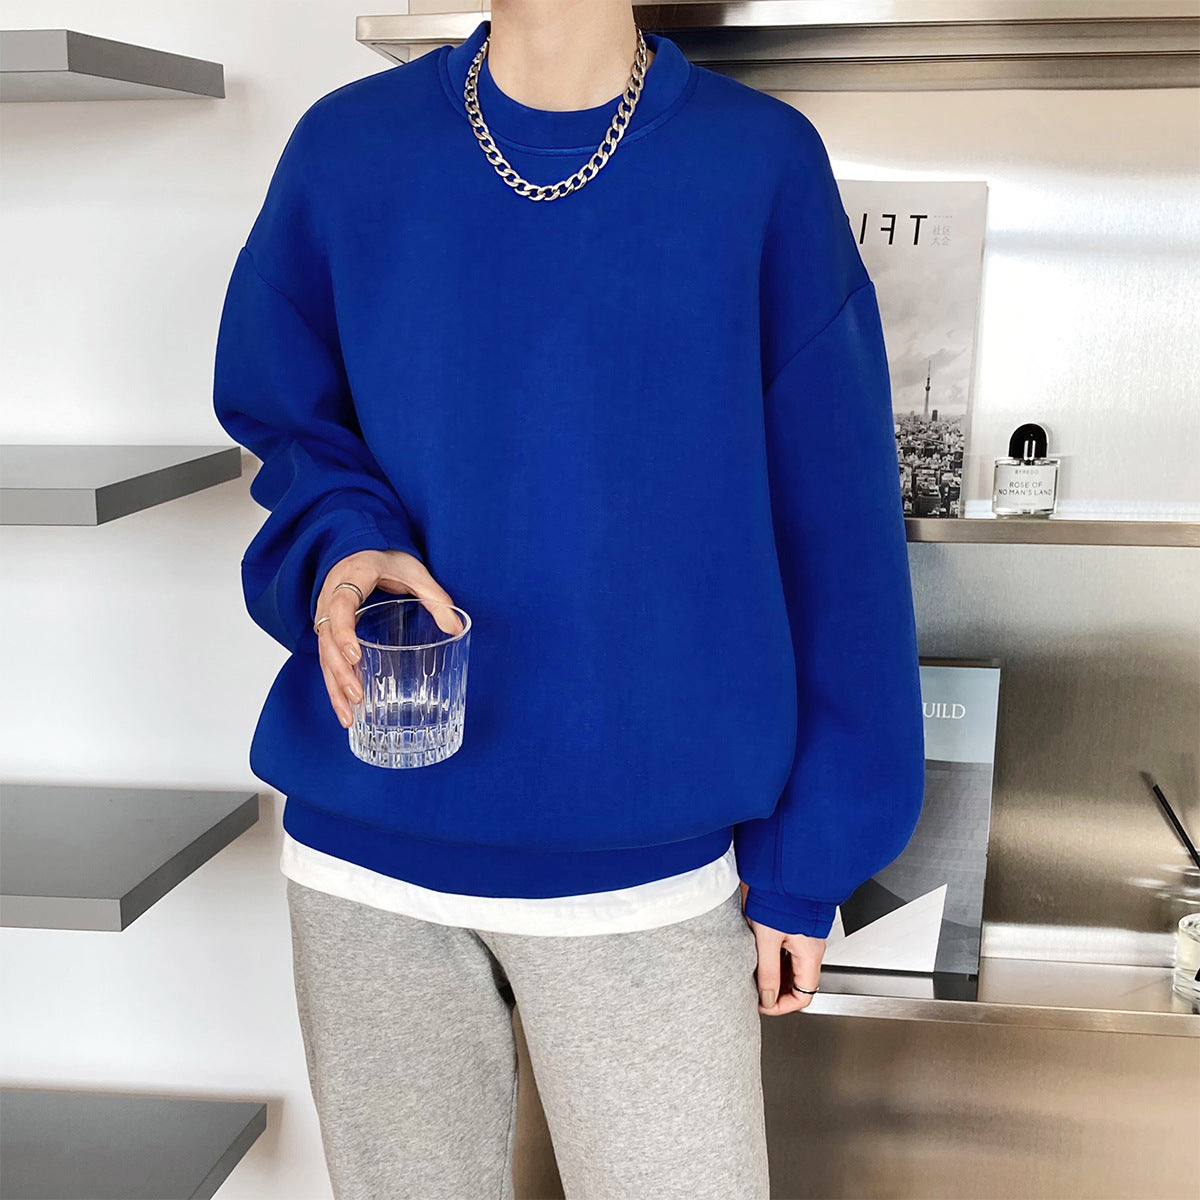 Fashionable Memory Cotton Sweater Women Spring Autumn Thin Design Loose Idle Air Layer Top